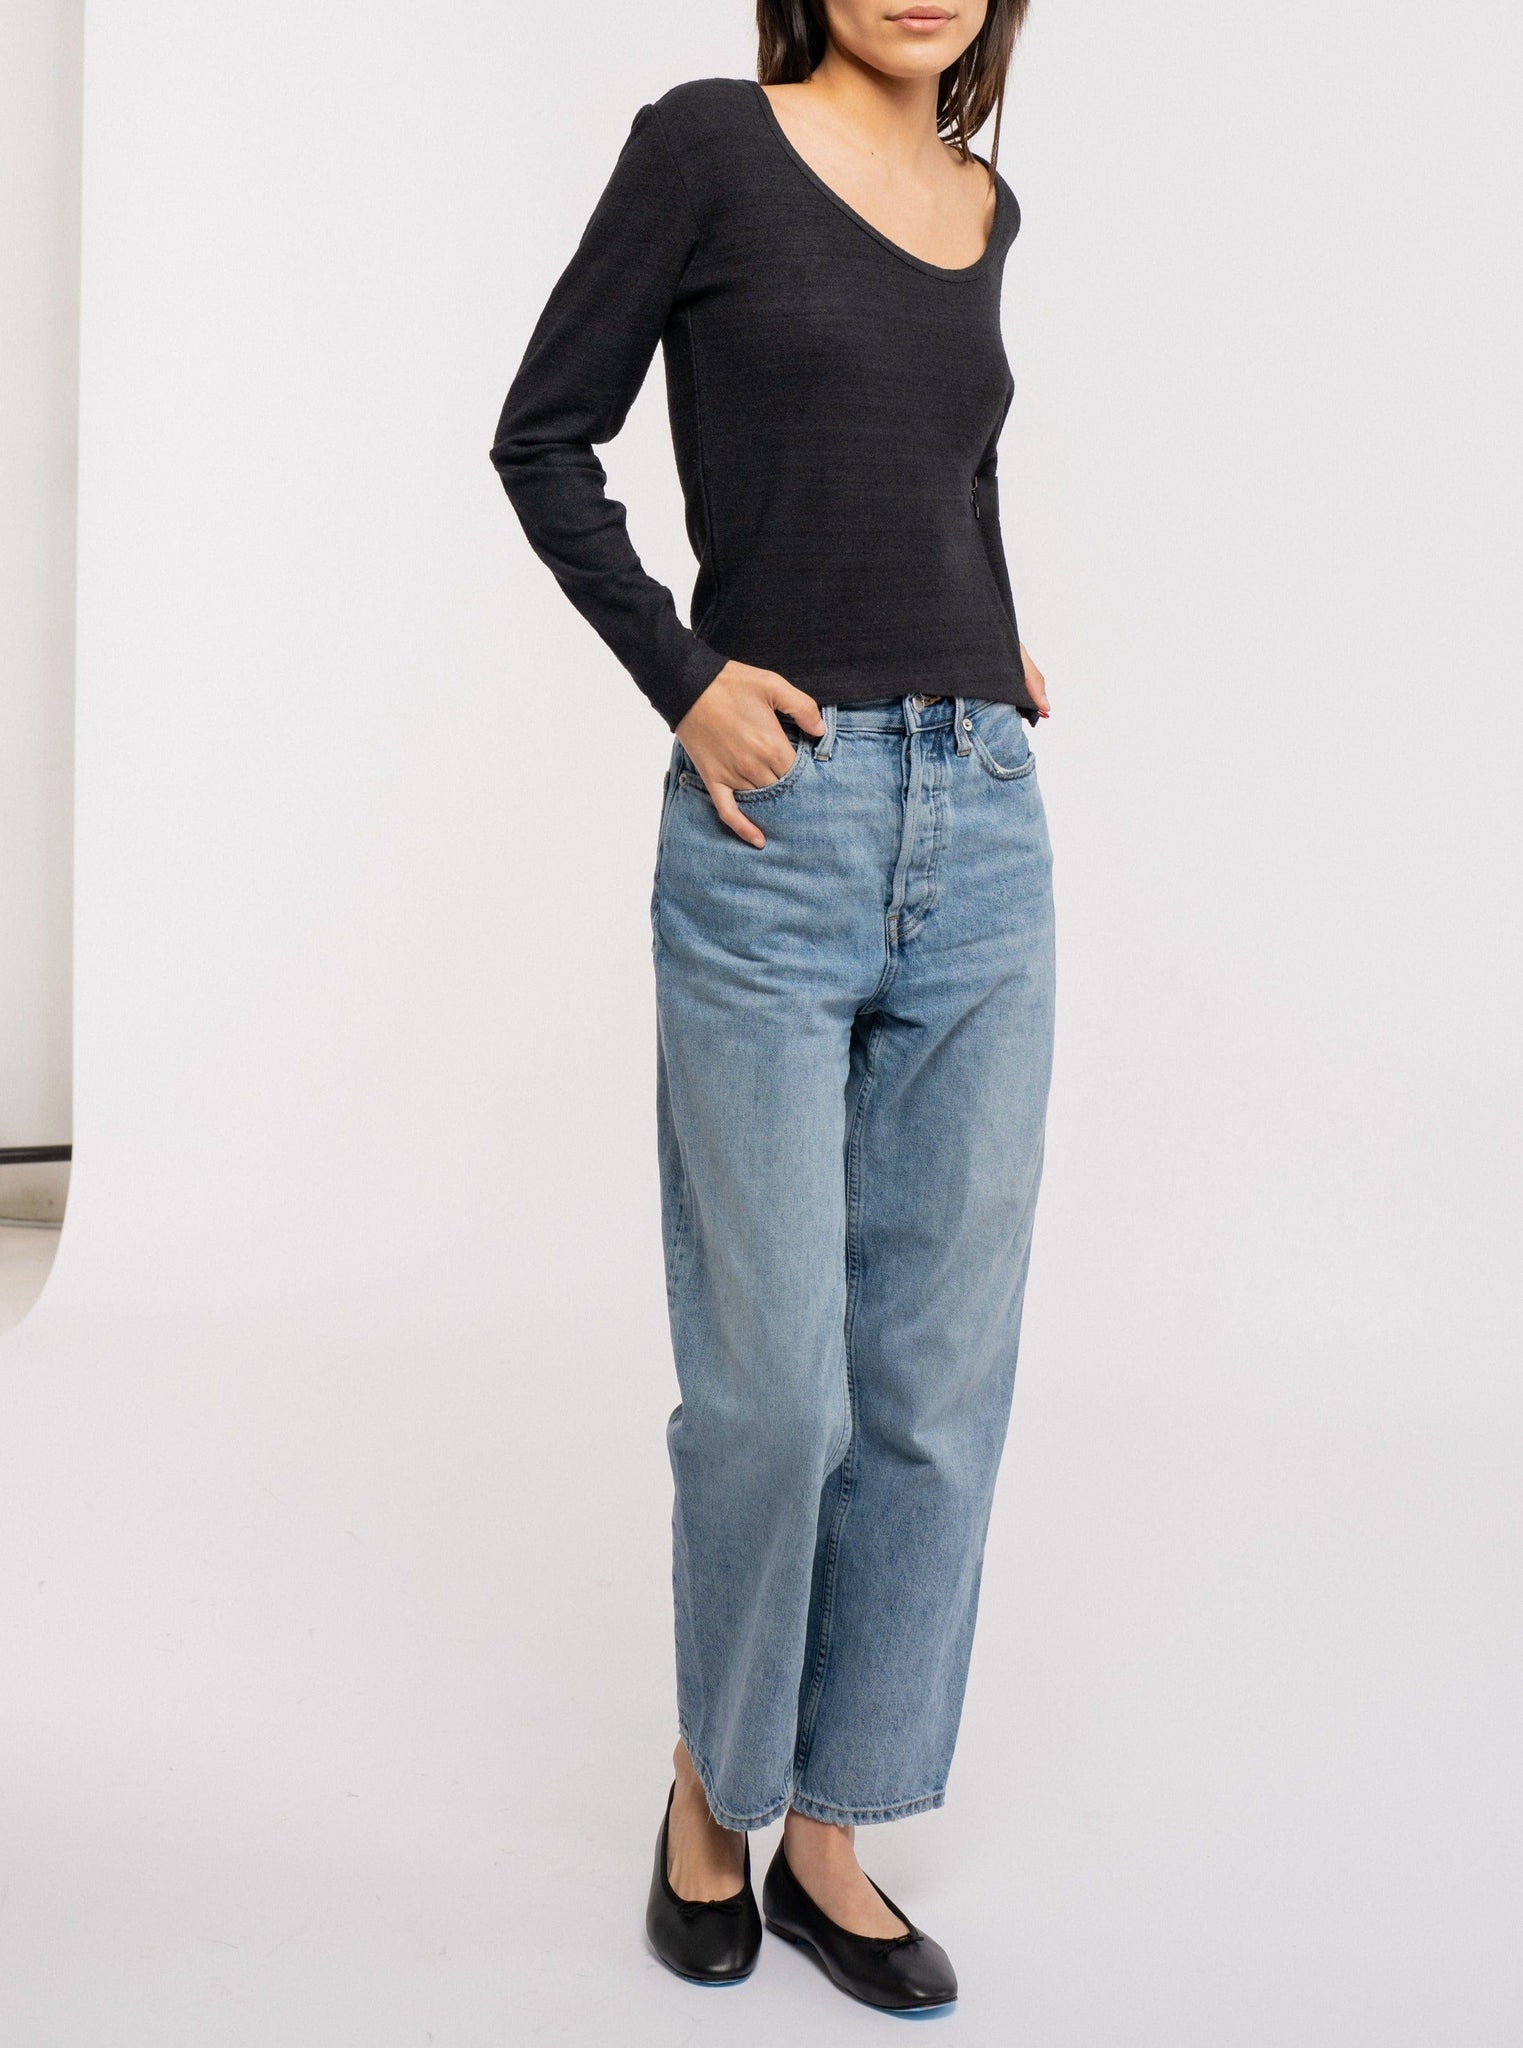 The model is wearing a black silk noil Scoop Neck Tee - Black and jeans.